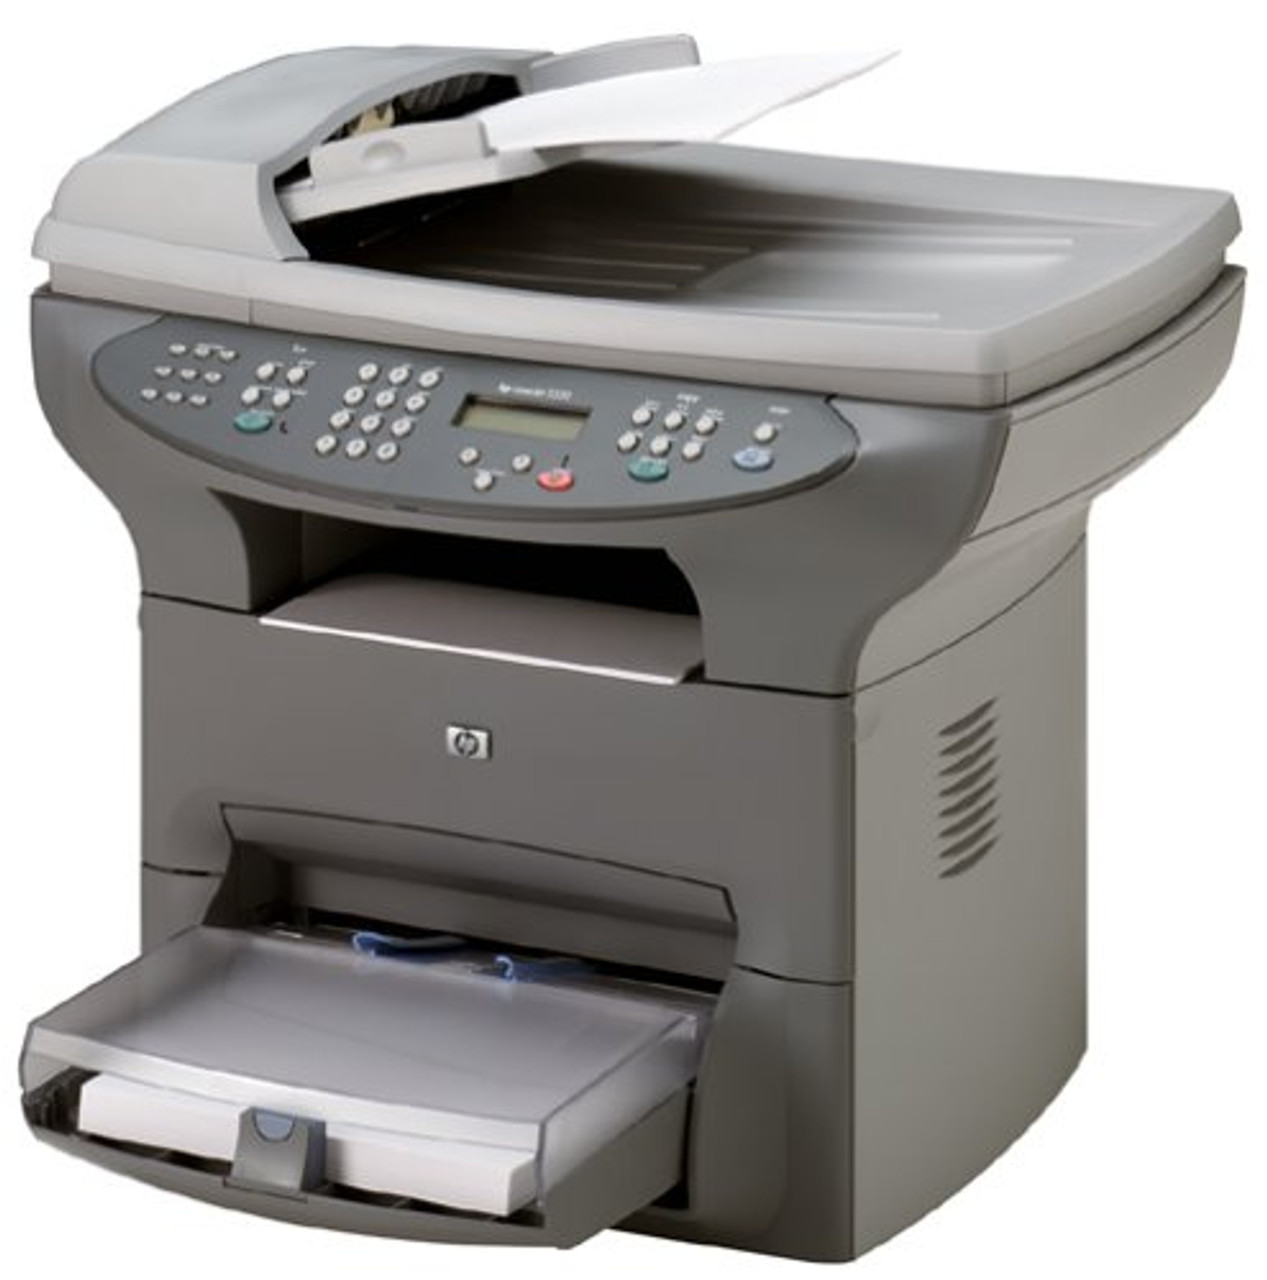 Printers And Scanners